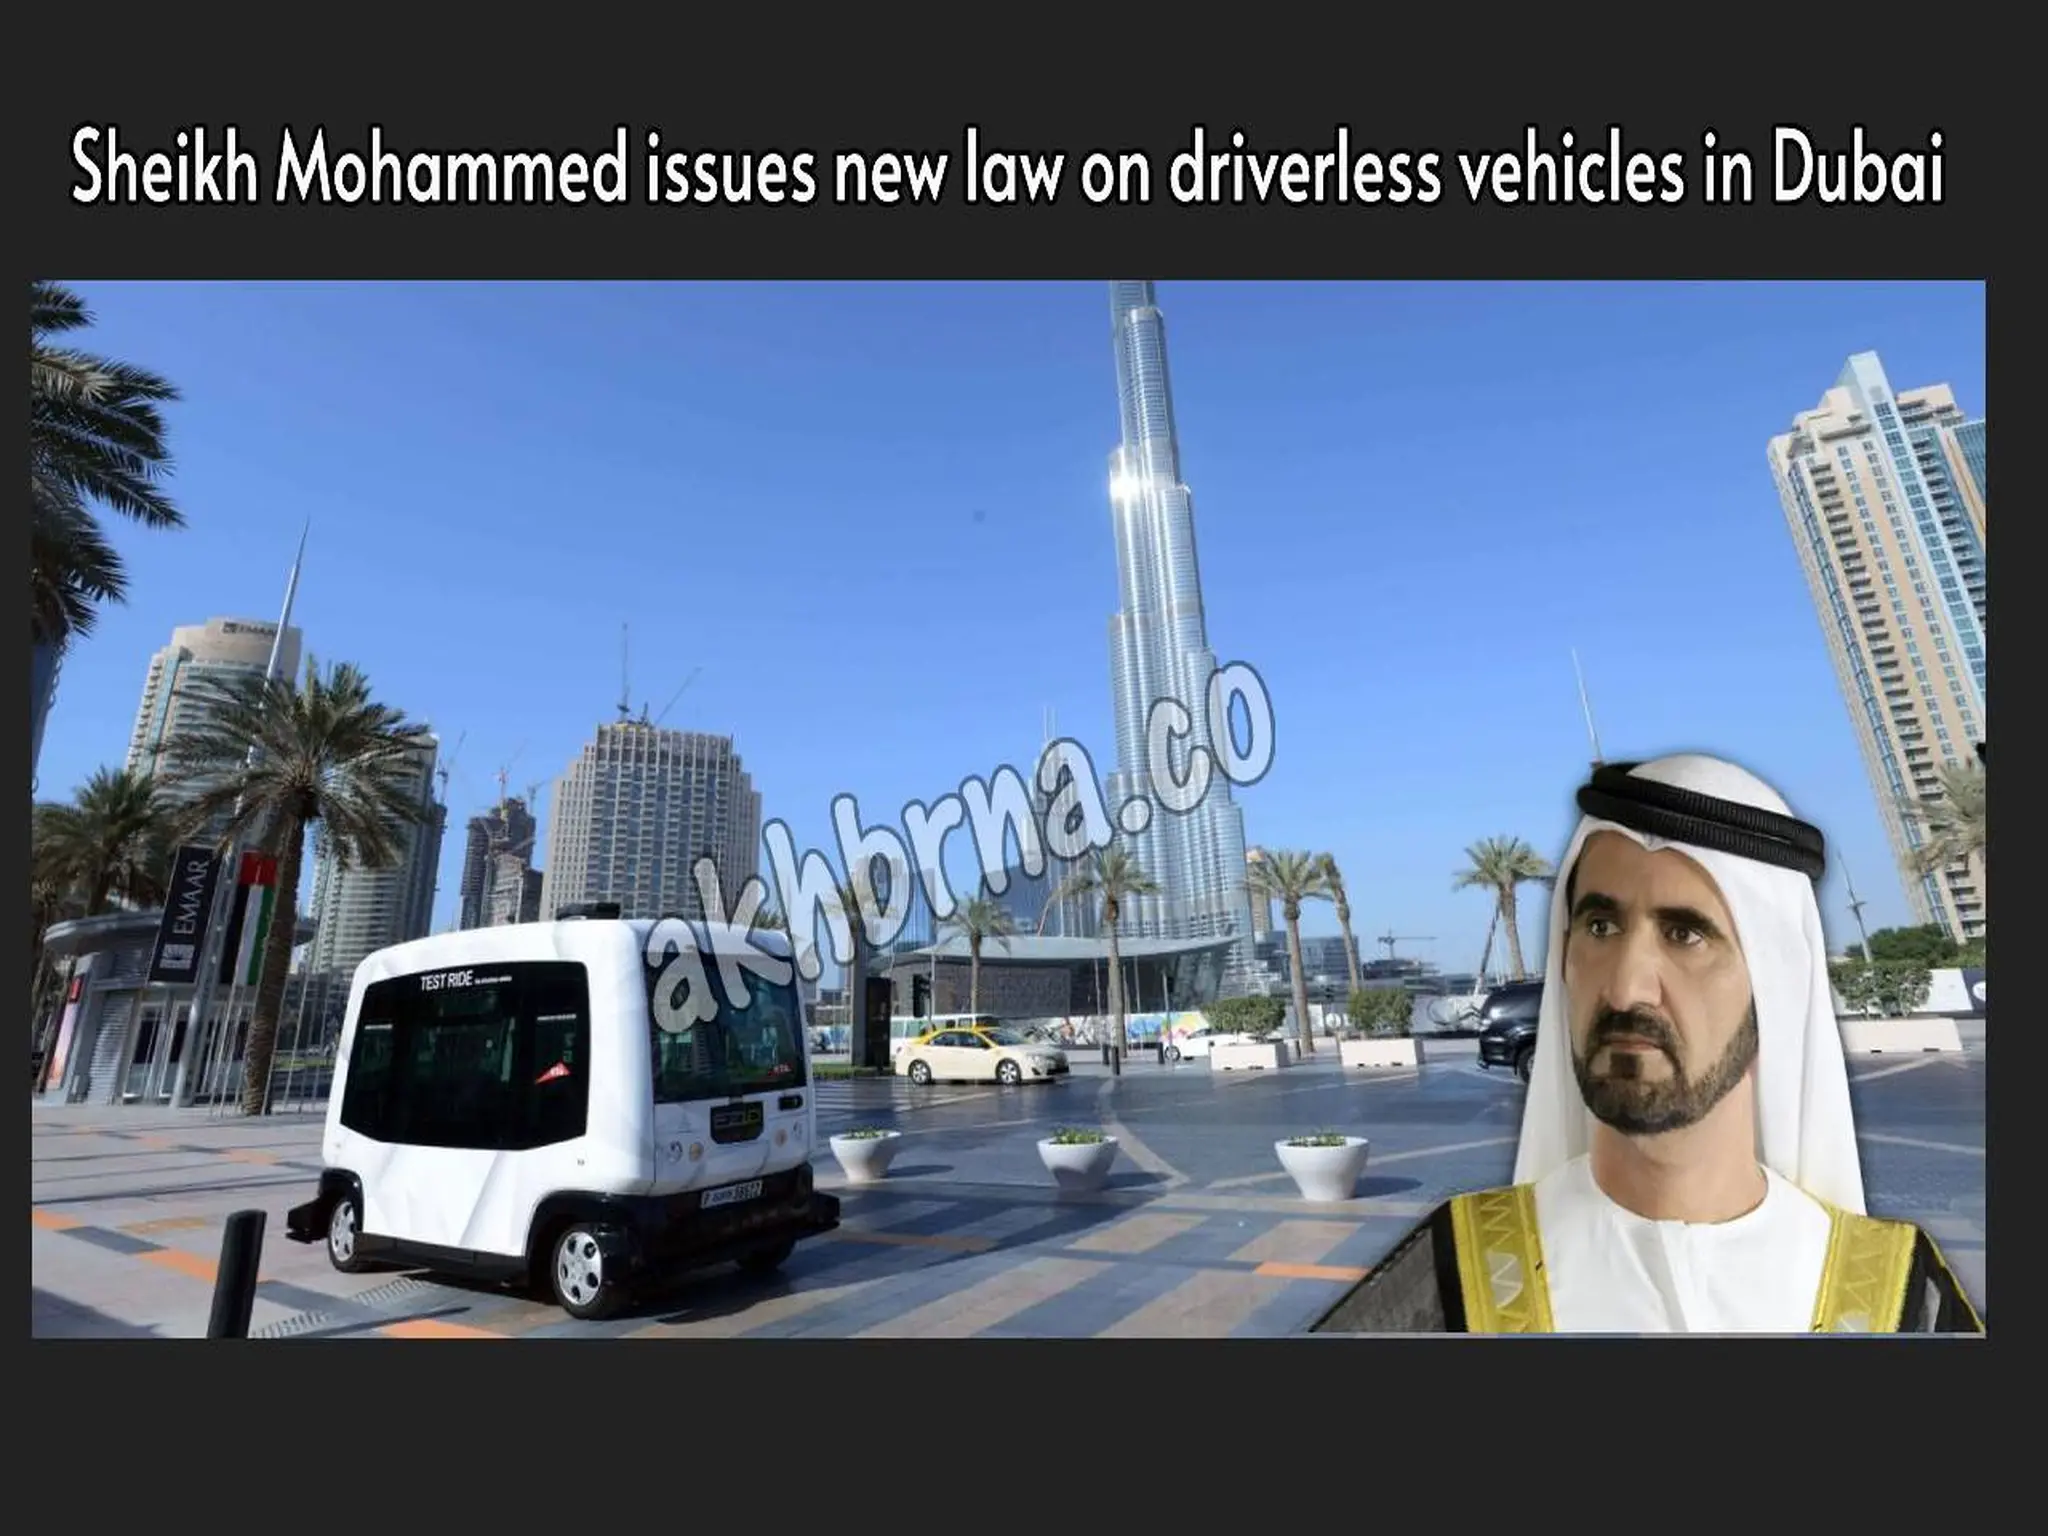 Sheikh Mohammed issues new law on driverless vehicles in Dubai, fine for violators